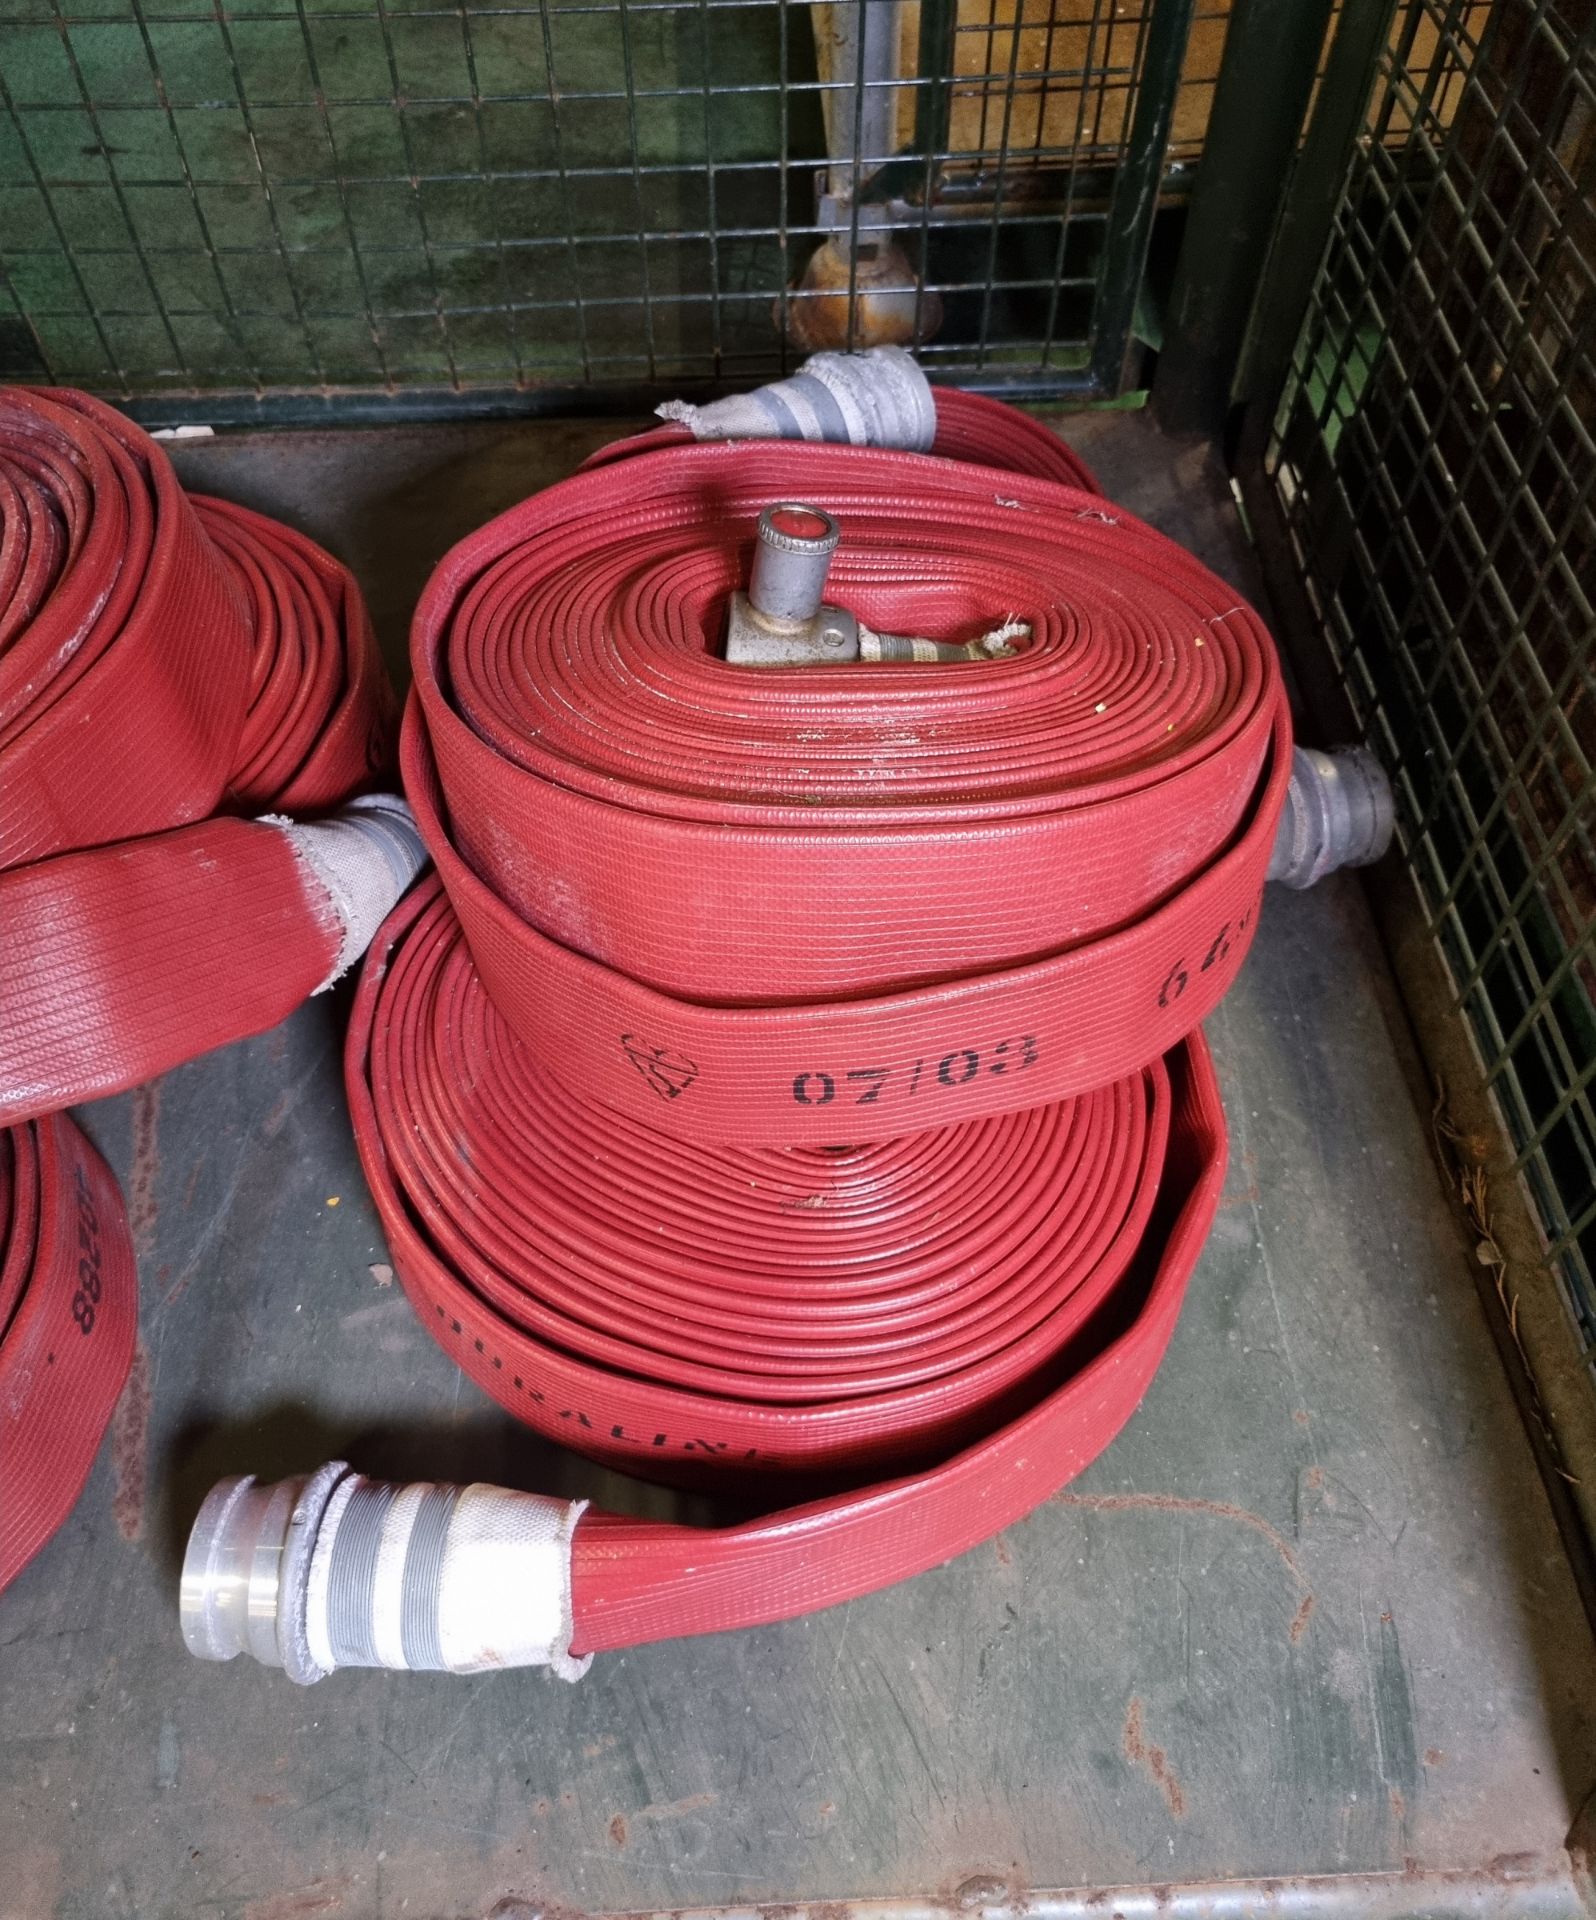 6x Angus Duraline 64mm lay flat hoses with couplings - approx 15m in length - Bild 3 aus 4